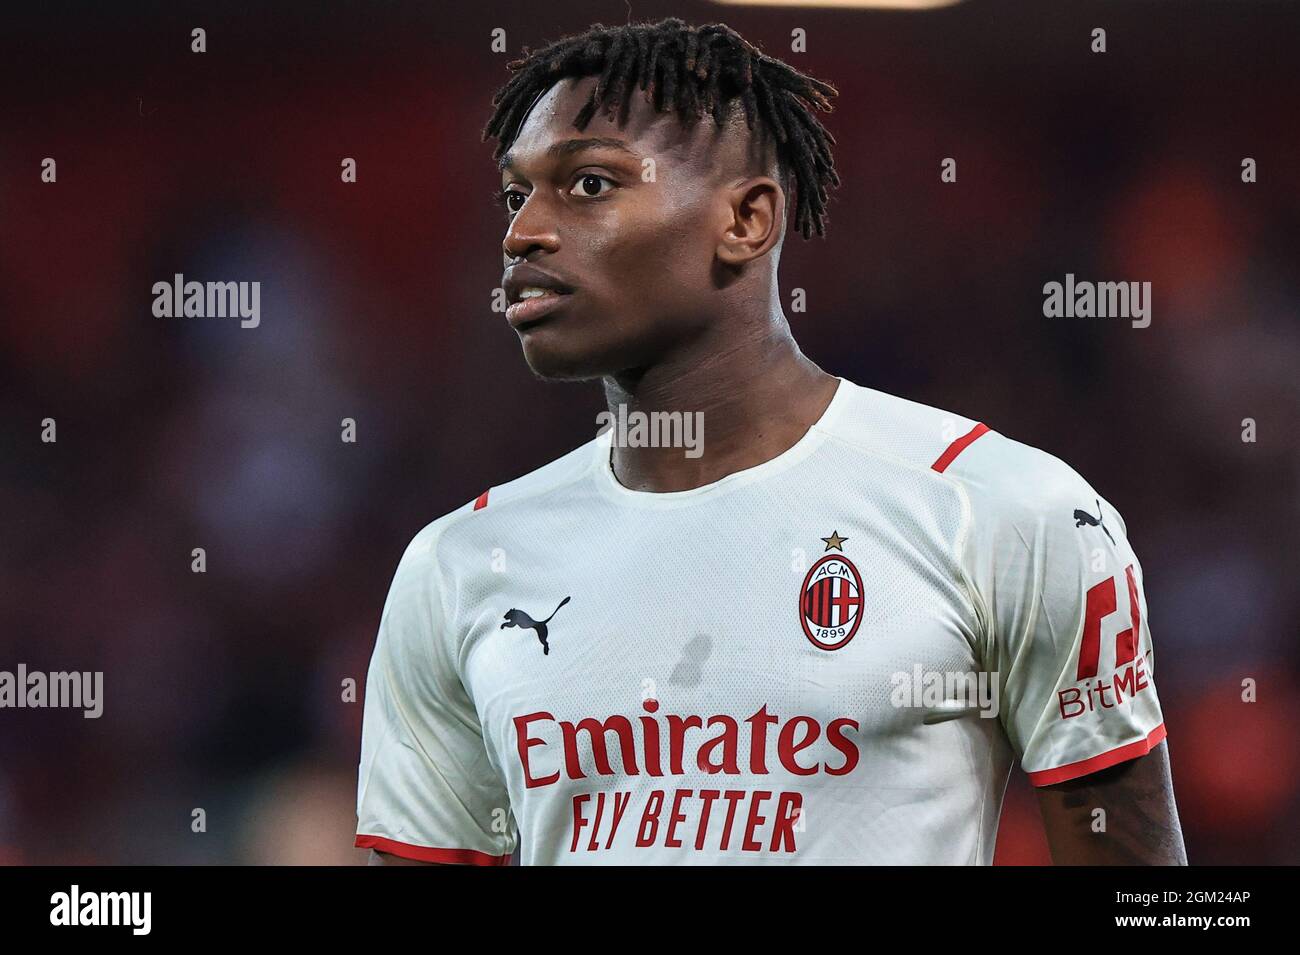 Liverpool, UK. 15th Sep, 2021. Rafael Leão #17 of AC Milan during the game in Liverpool, United Kingdom on 9/15/2021. (Photo by Mark Cosgrove/News Images/Sipa USA) Credit: Sipa USA/Alamy Live News Stock Photo